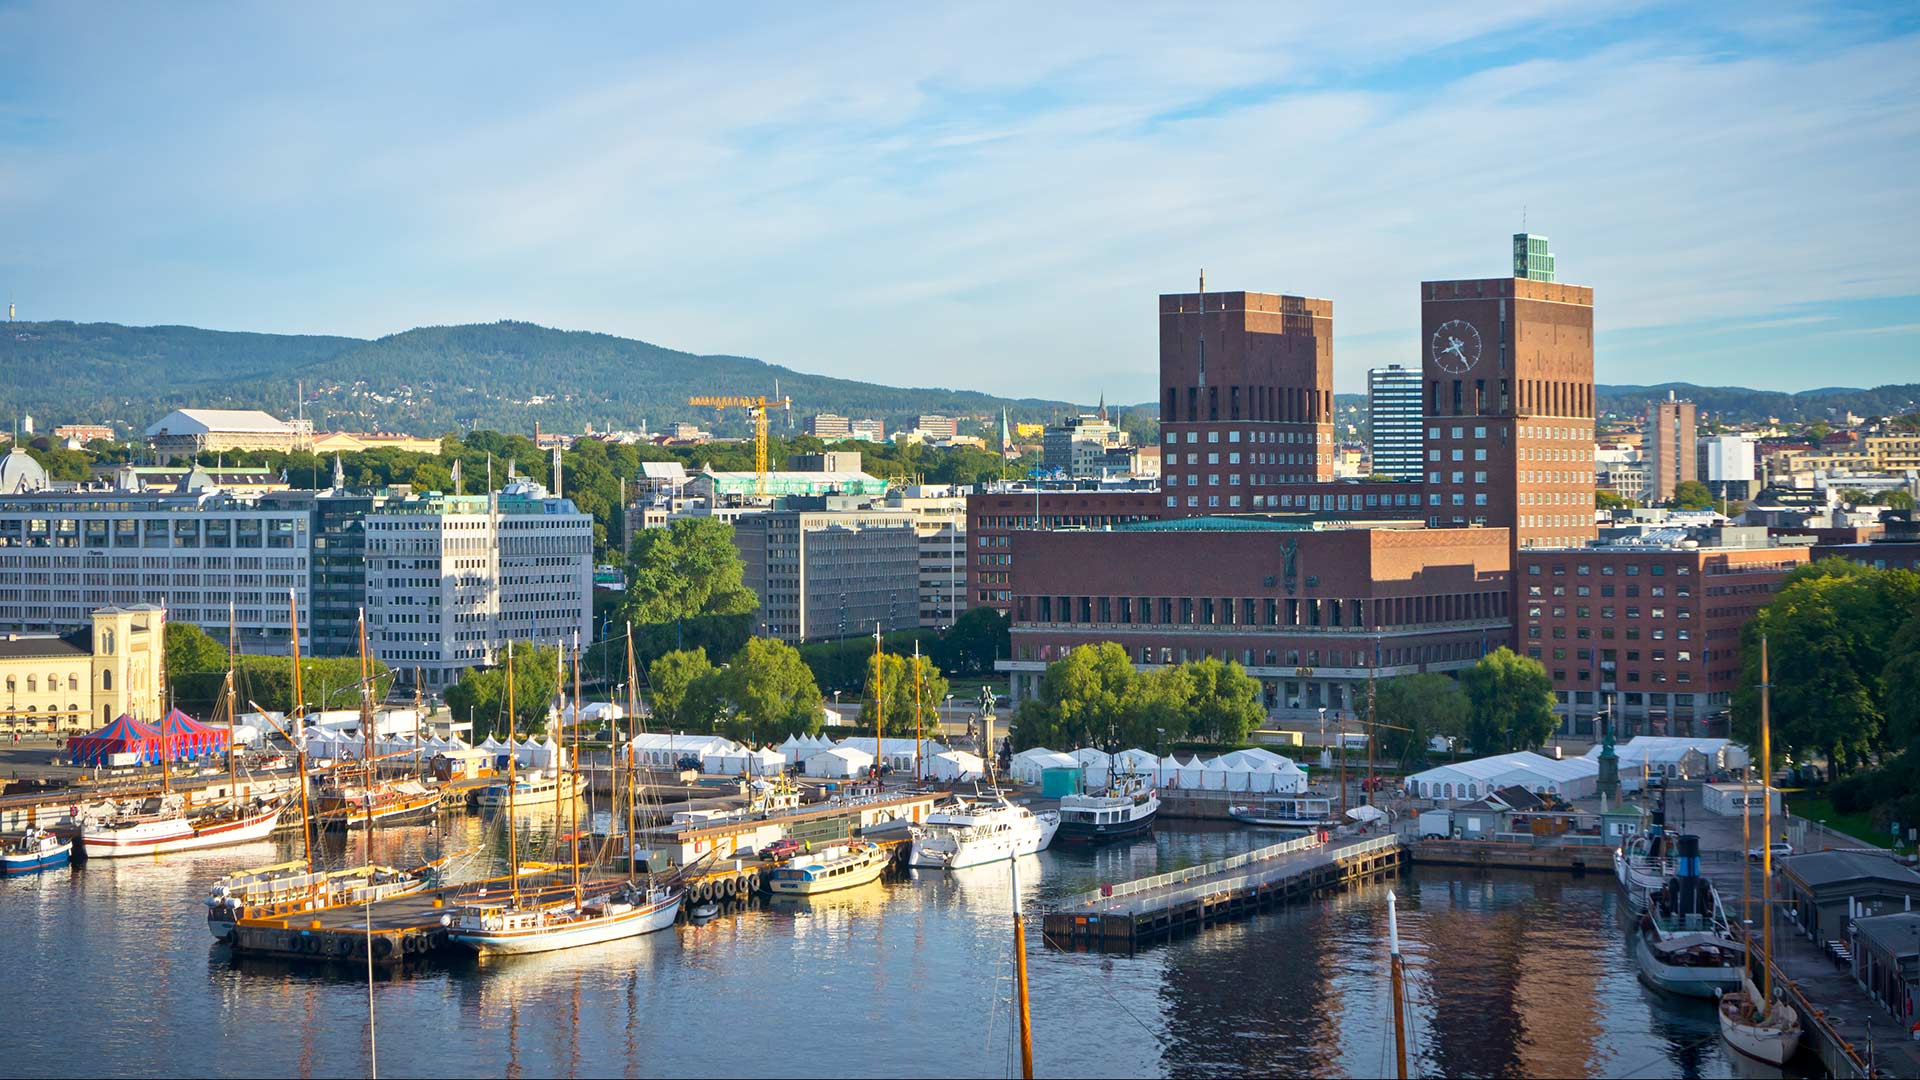 Oslo town hall and nearby harbour with boats